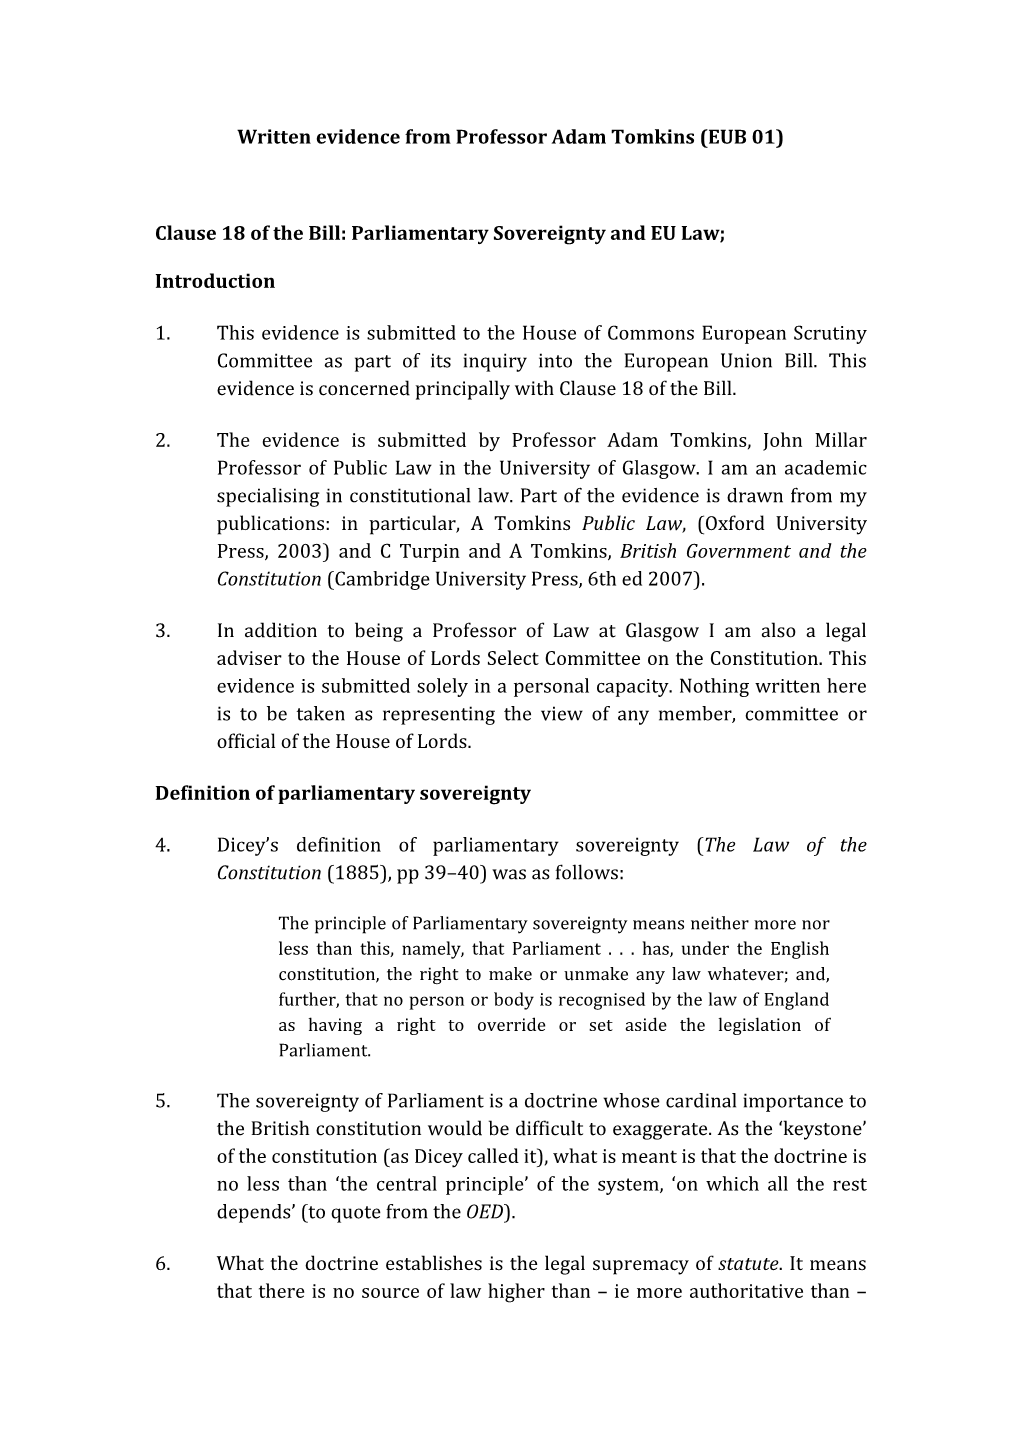 (EUB 01) Clause 18 of the Bill: Parliamentary Sovereignty and EU